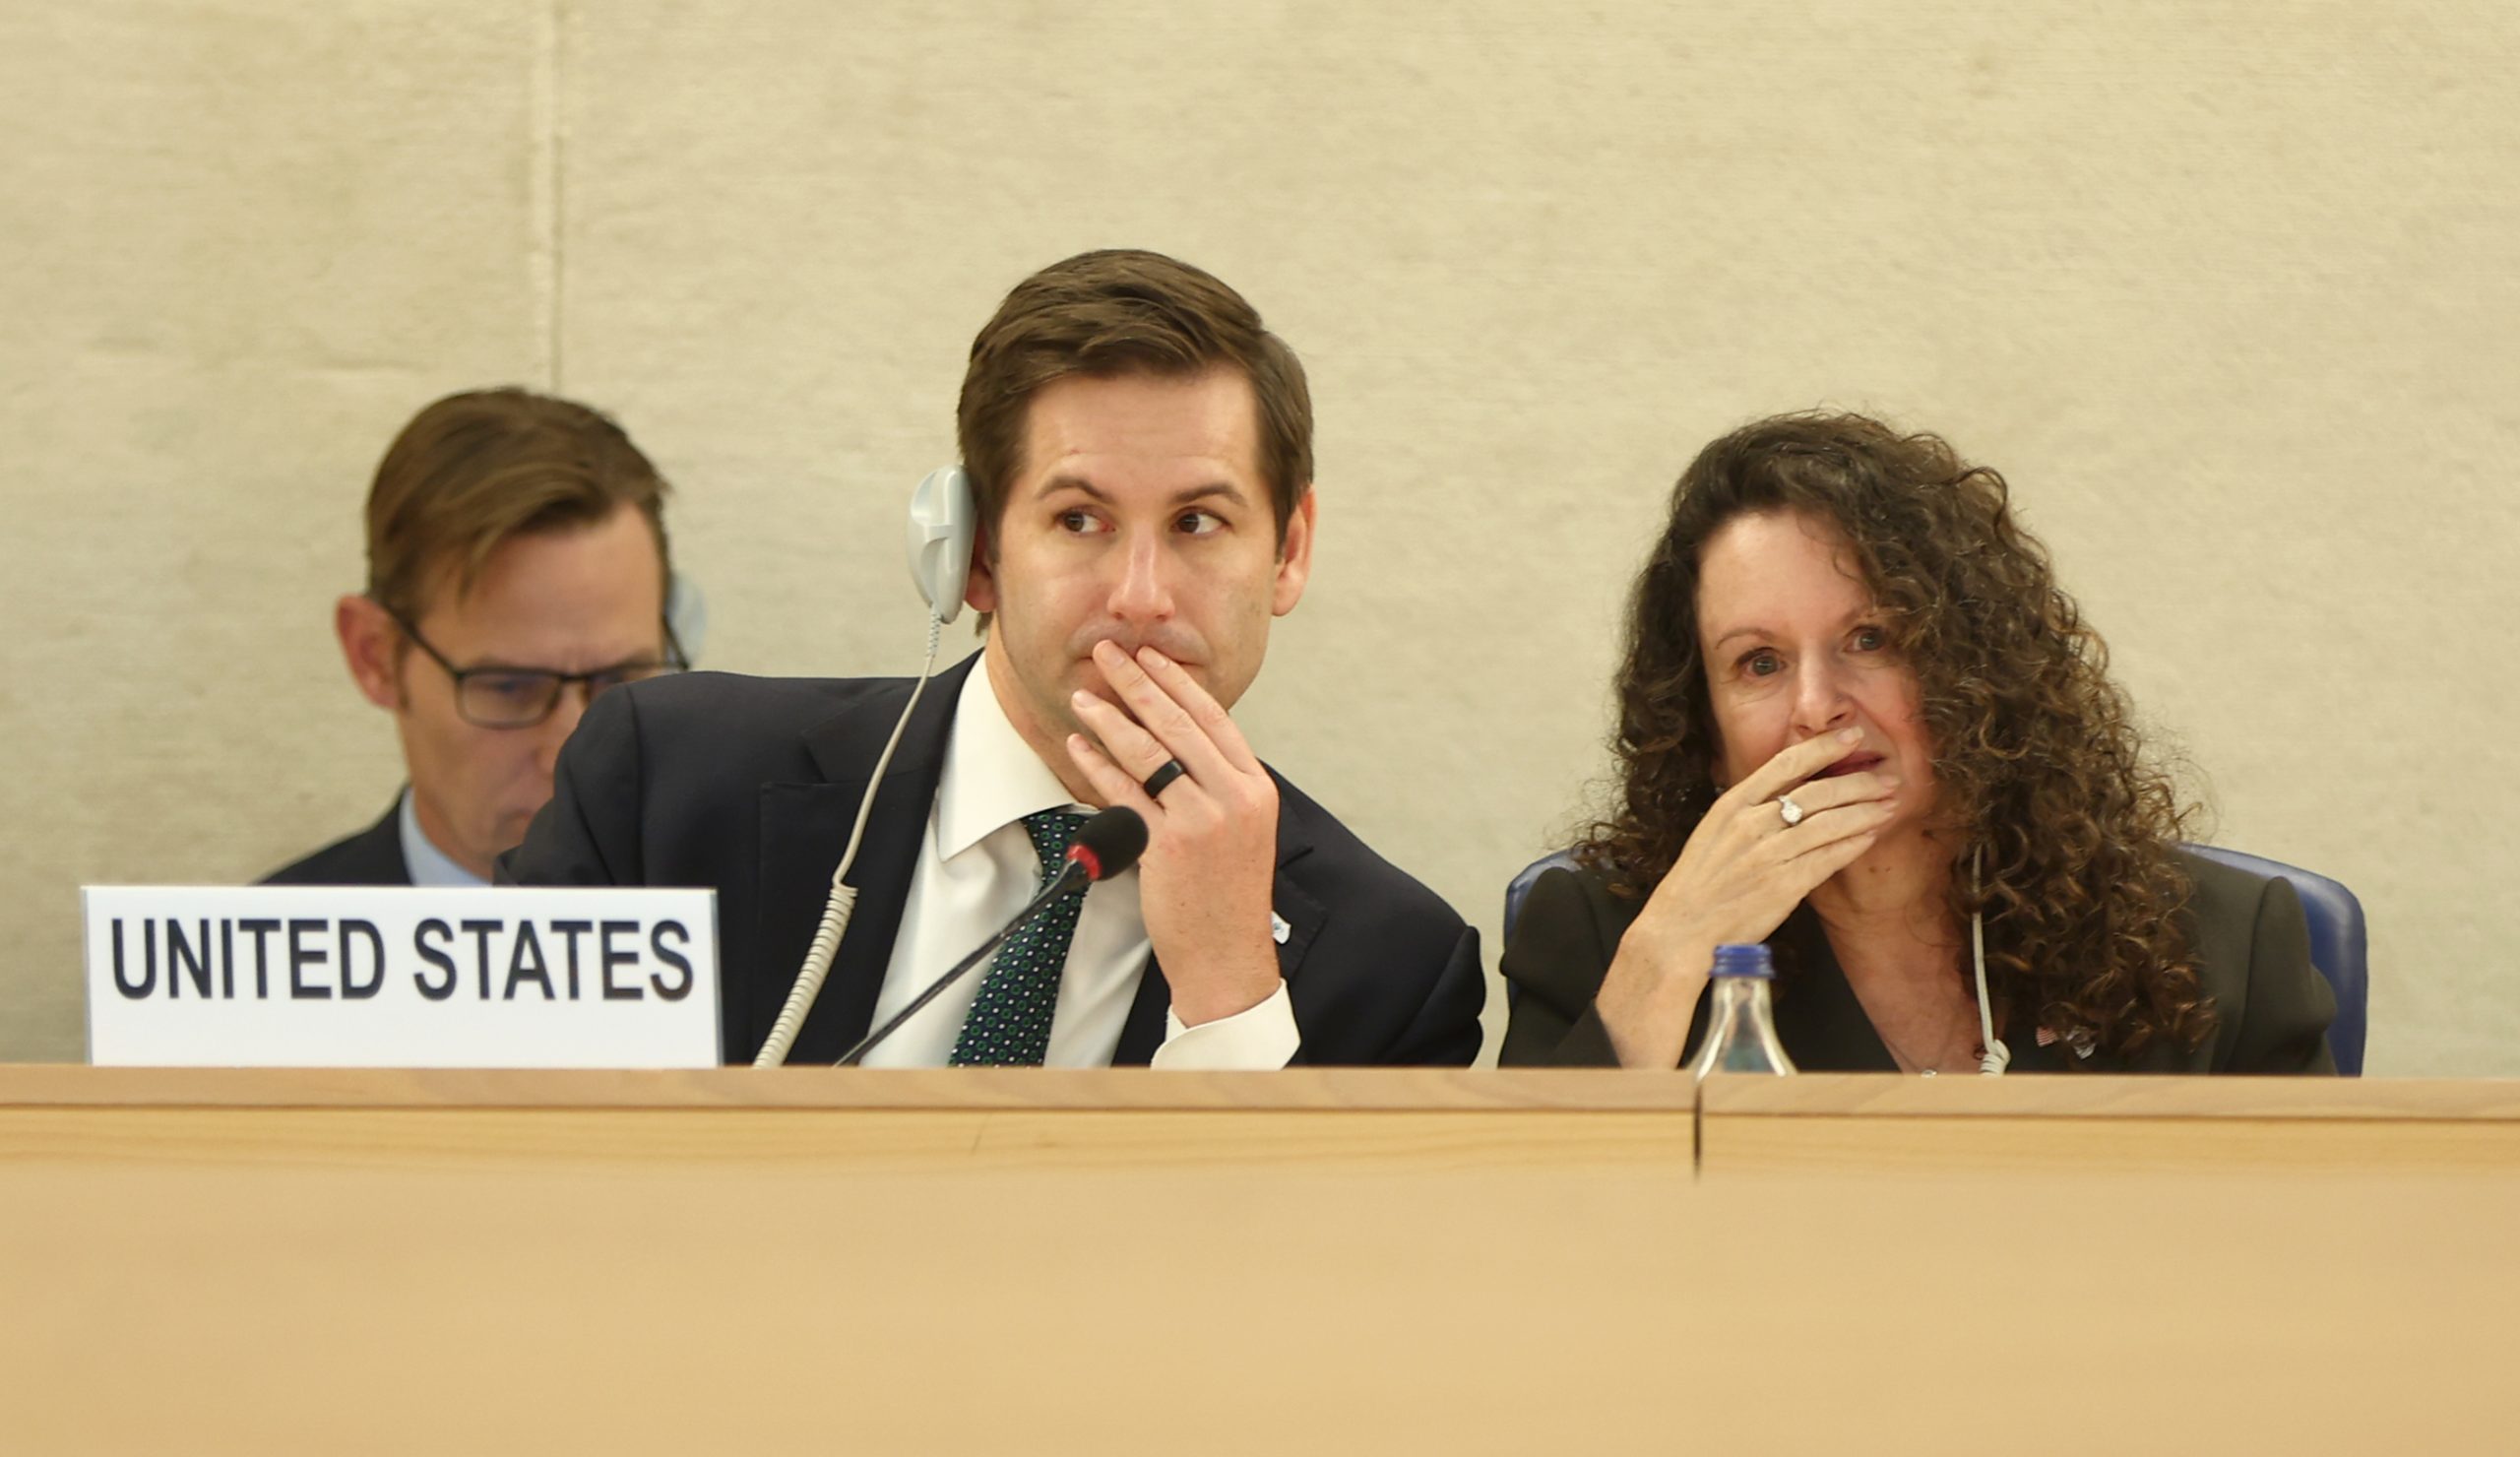 A delegation from the United States answers questions during the October 17-18 ICCPR periodic review at the United Nations in Geneva.